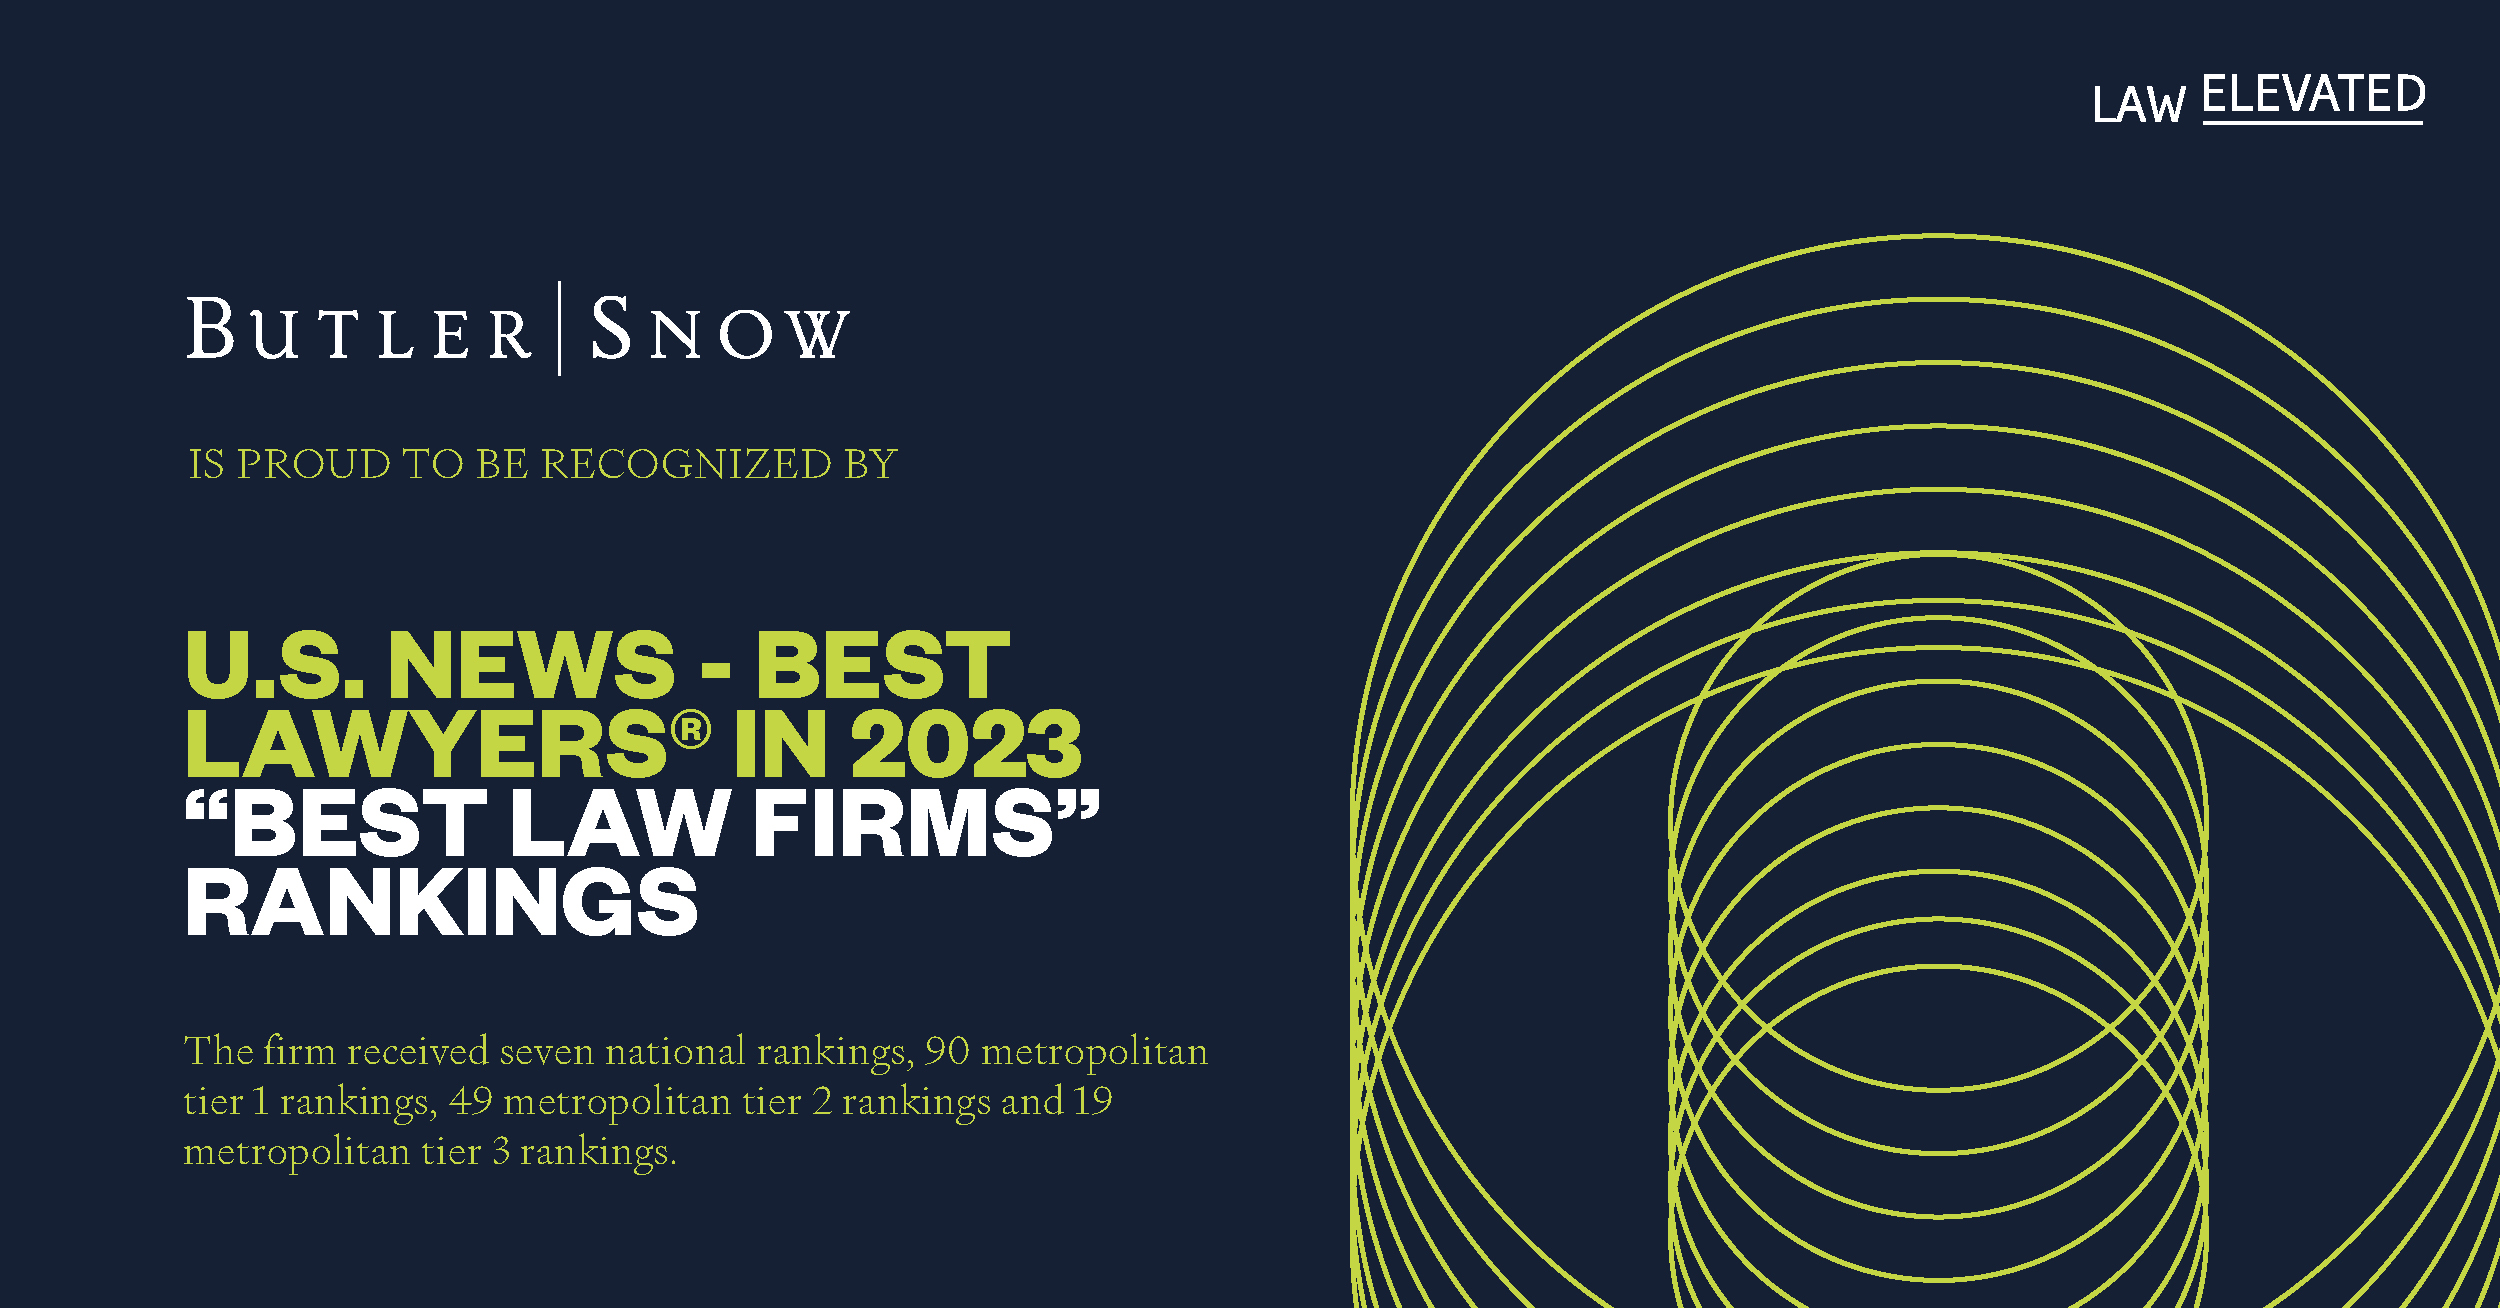 Butler Snow Recognized by U.S. News – Best Lawyers® in 2023 “Best Law Firms” Rankings